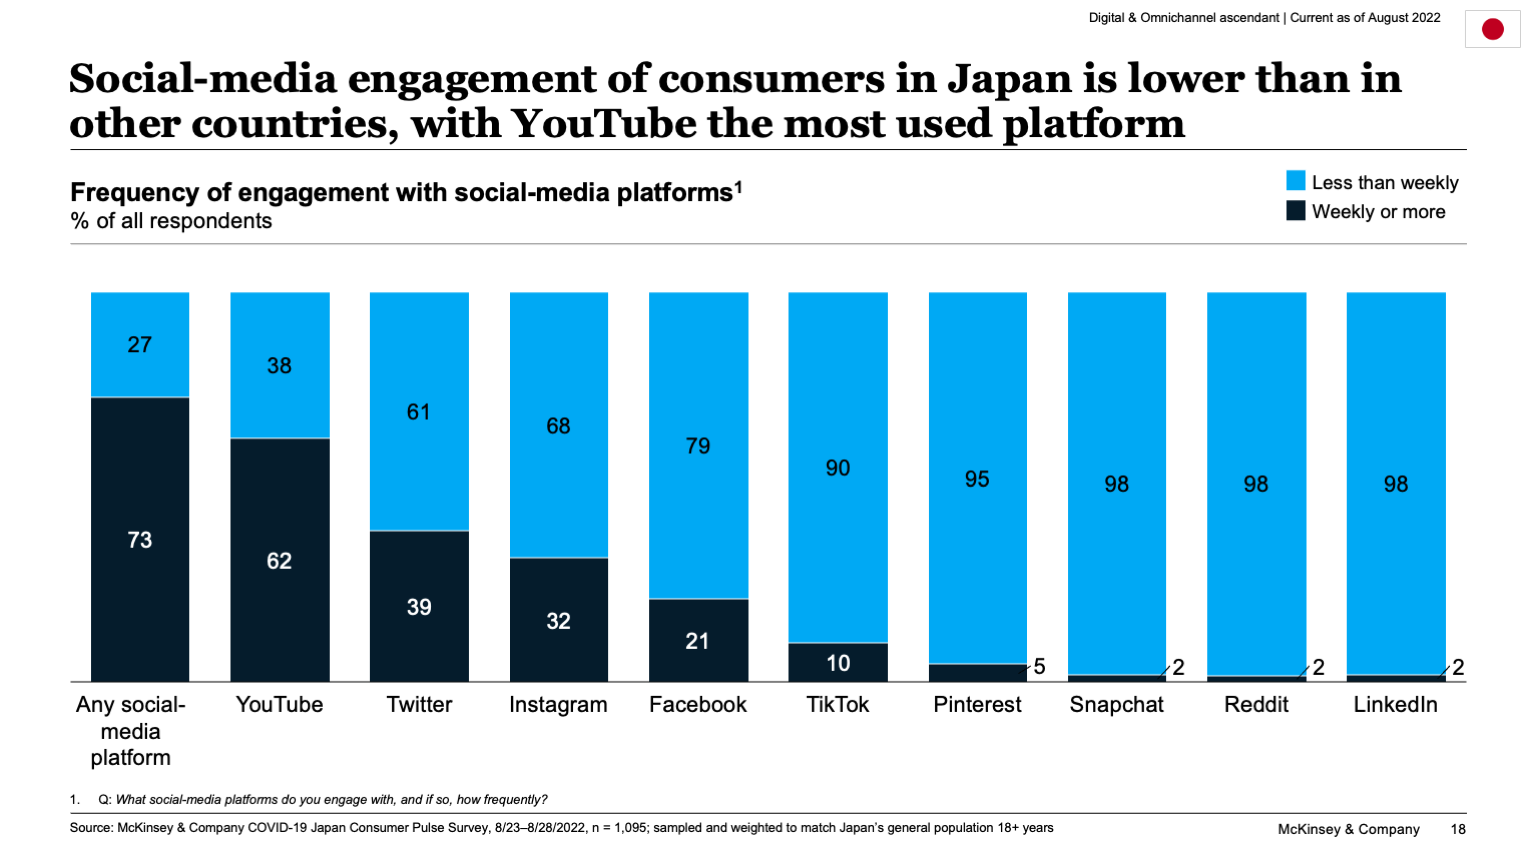 Social-media engagement of consumers in Japan is lower than in other countries, with YouTube the most used platform